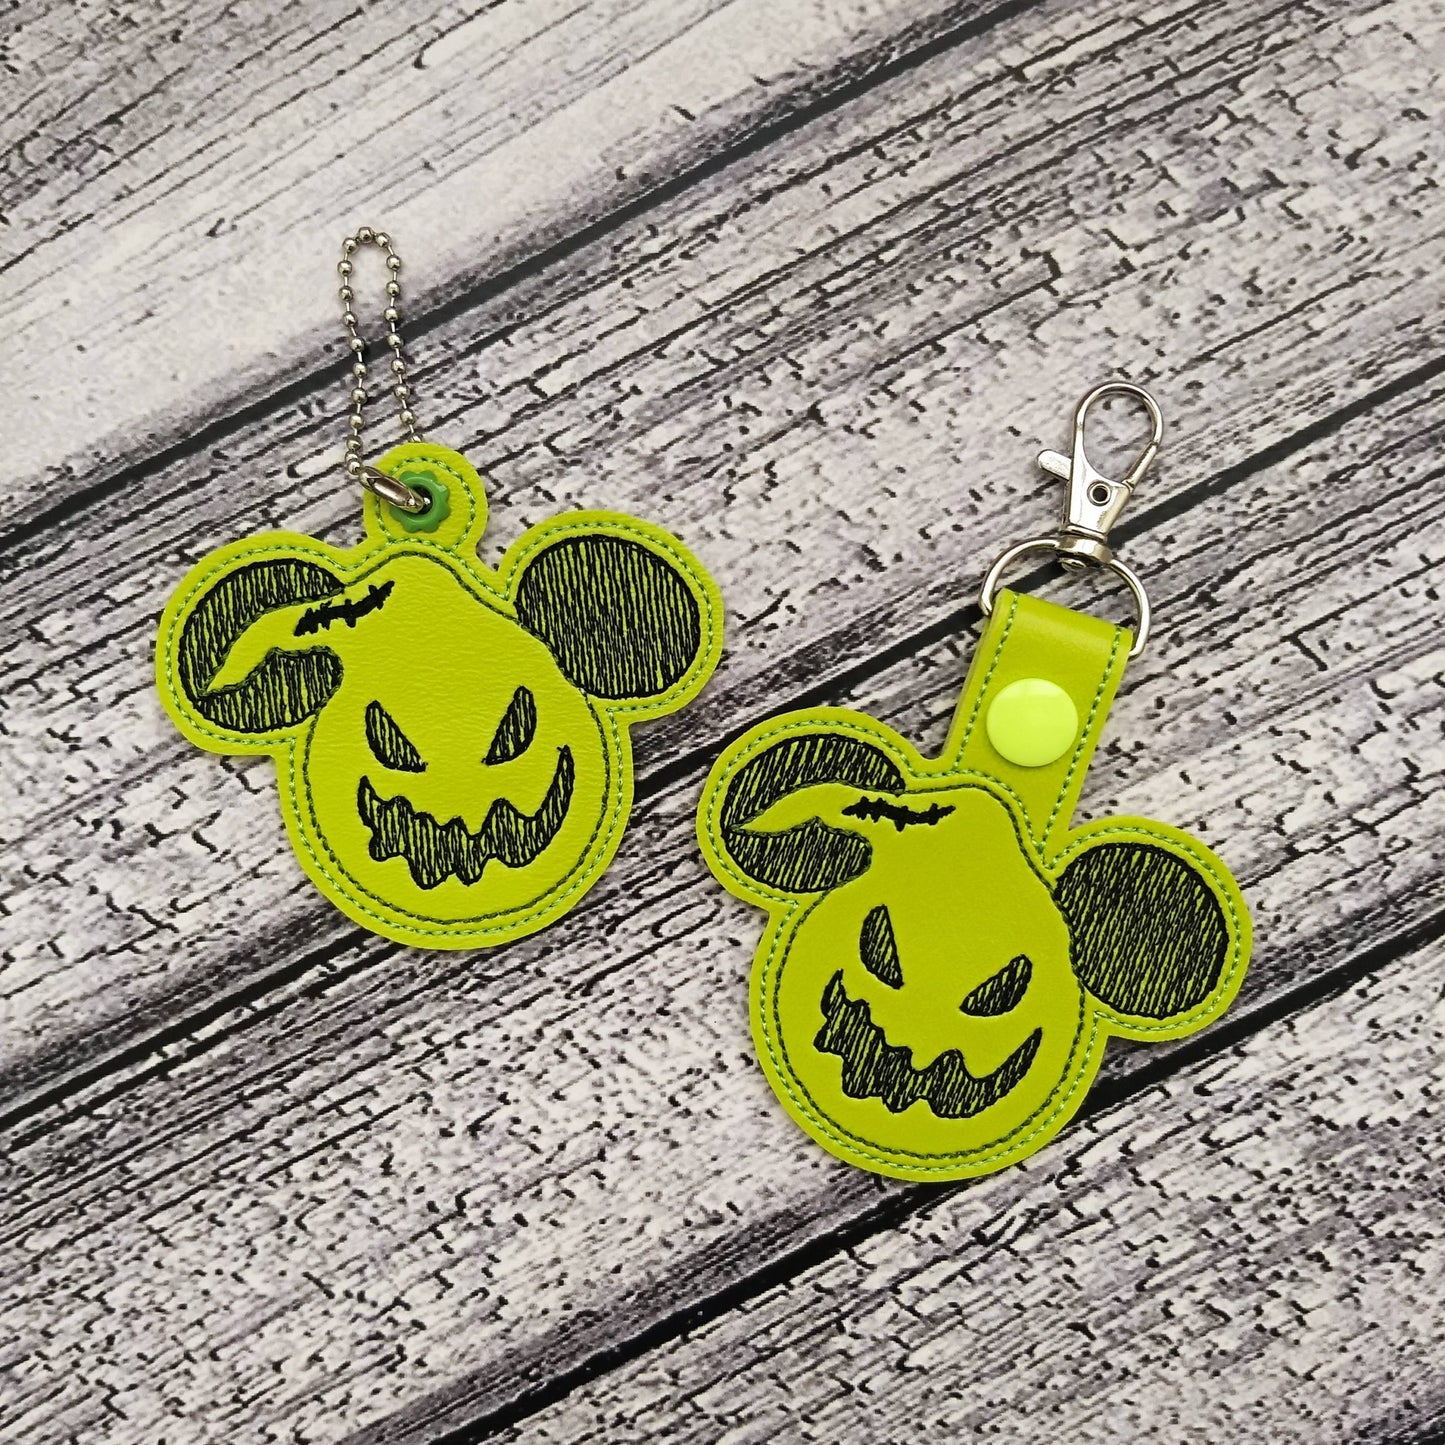 Oogie Mouse Fobs - DIGITAL Embroidery DESIGN